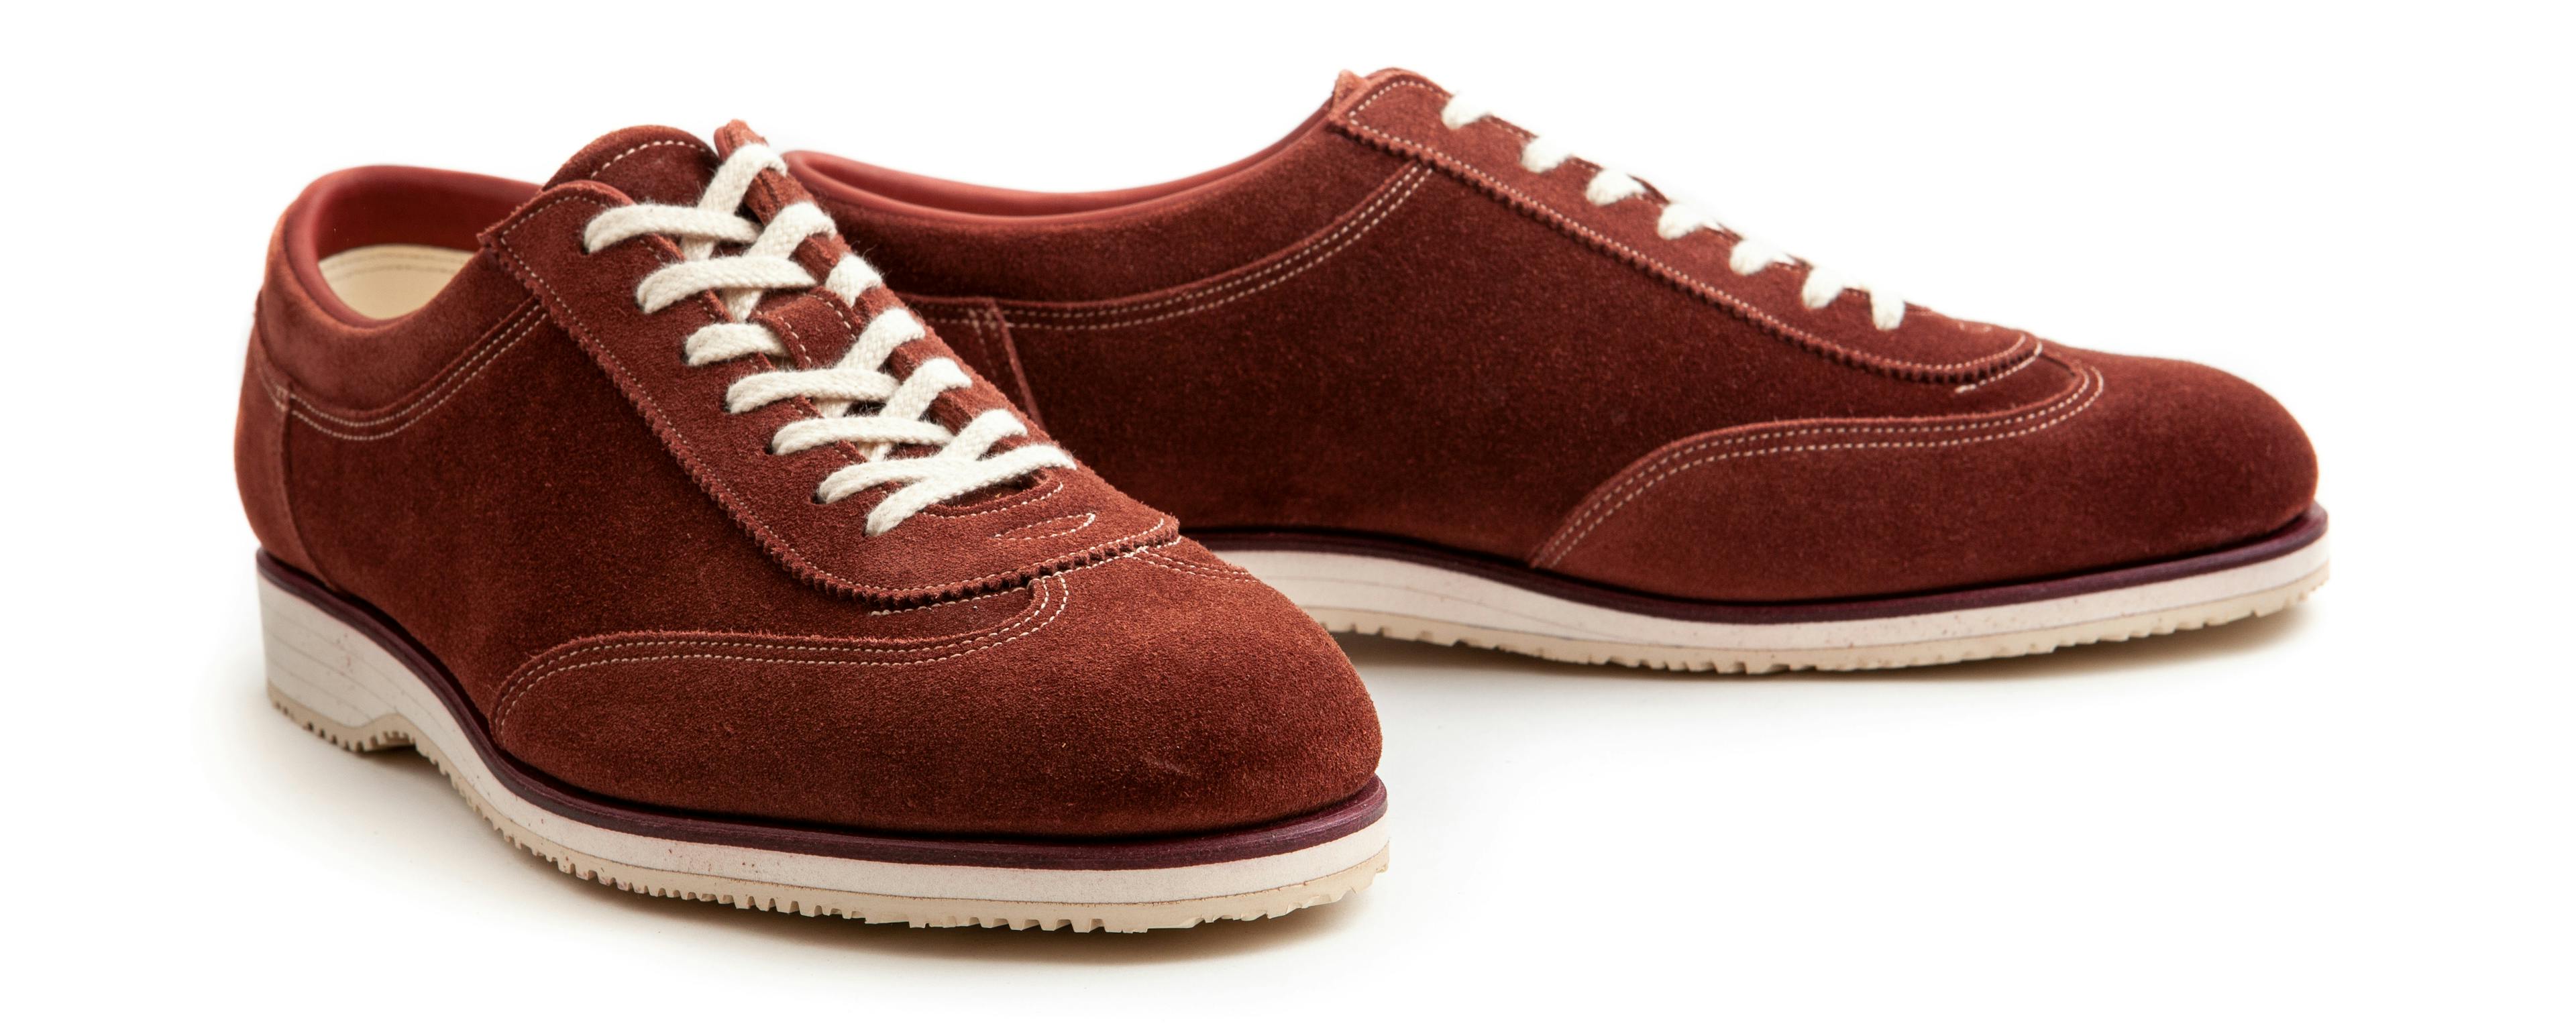 Suede, Leather or Canvas: Which One's Better For Shoes? - The